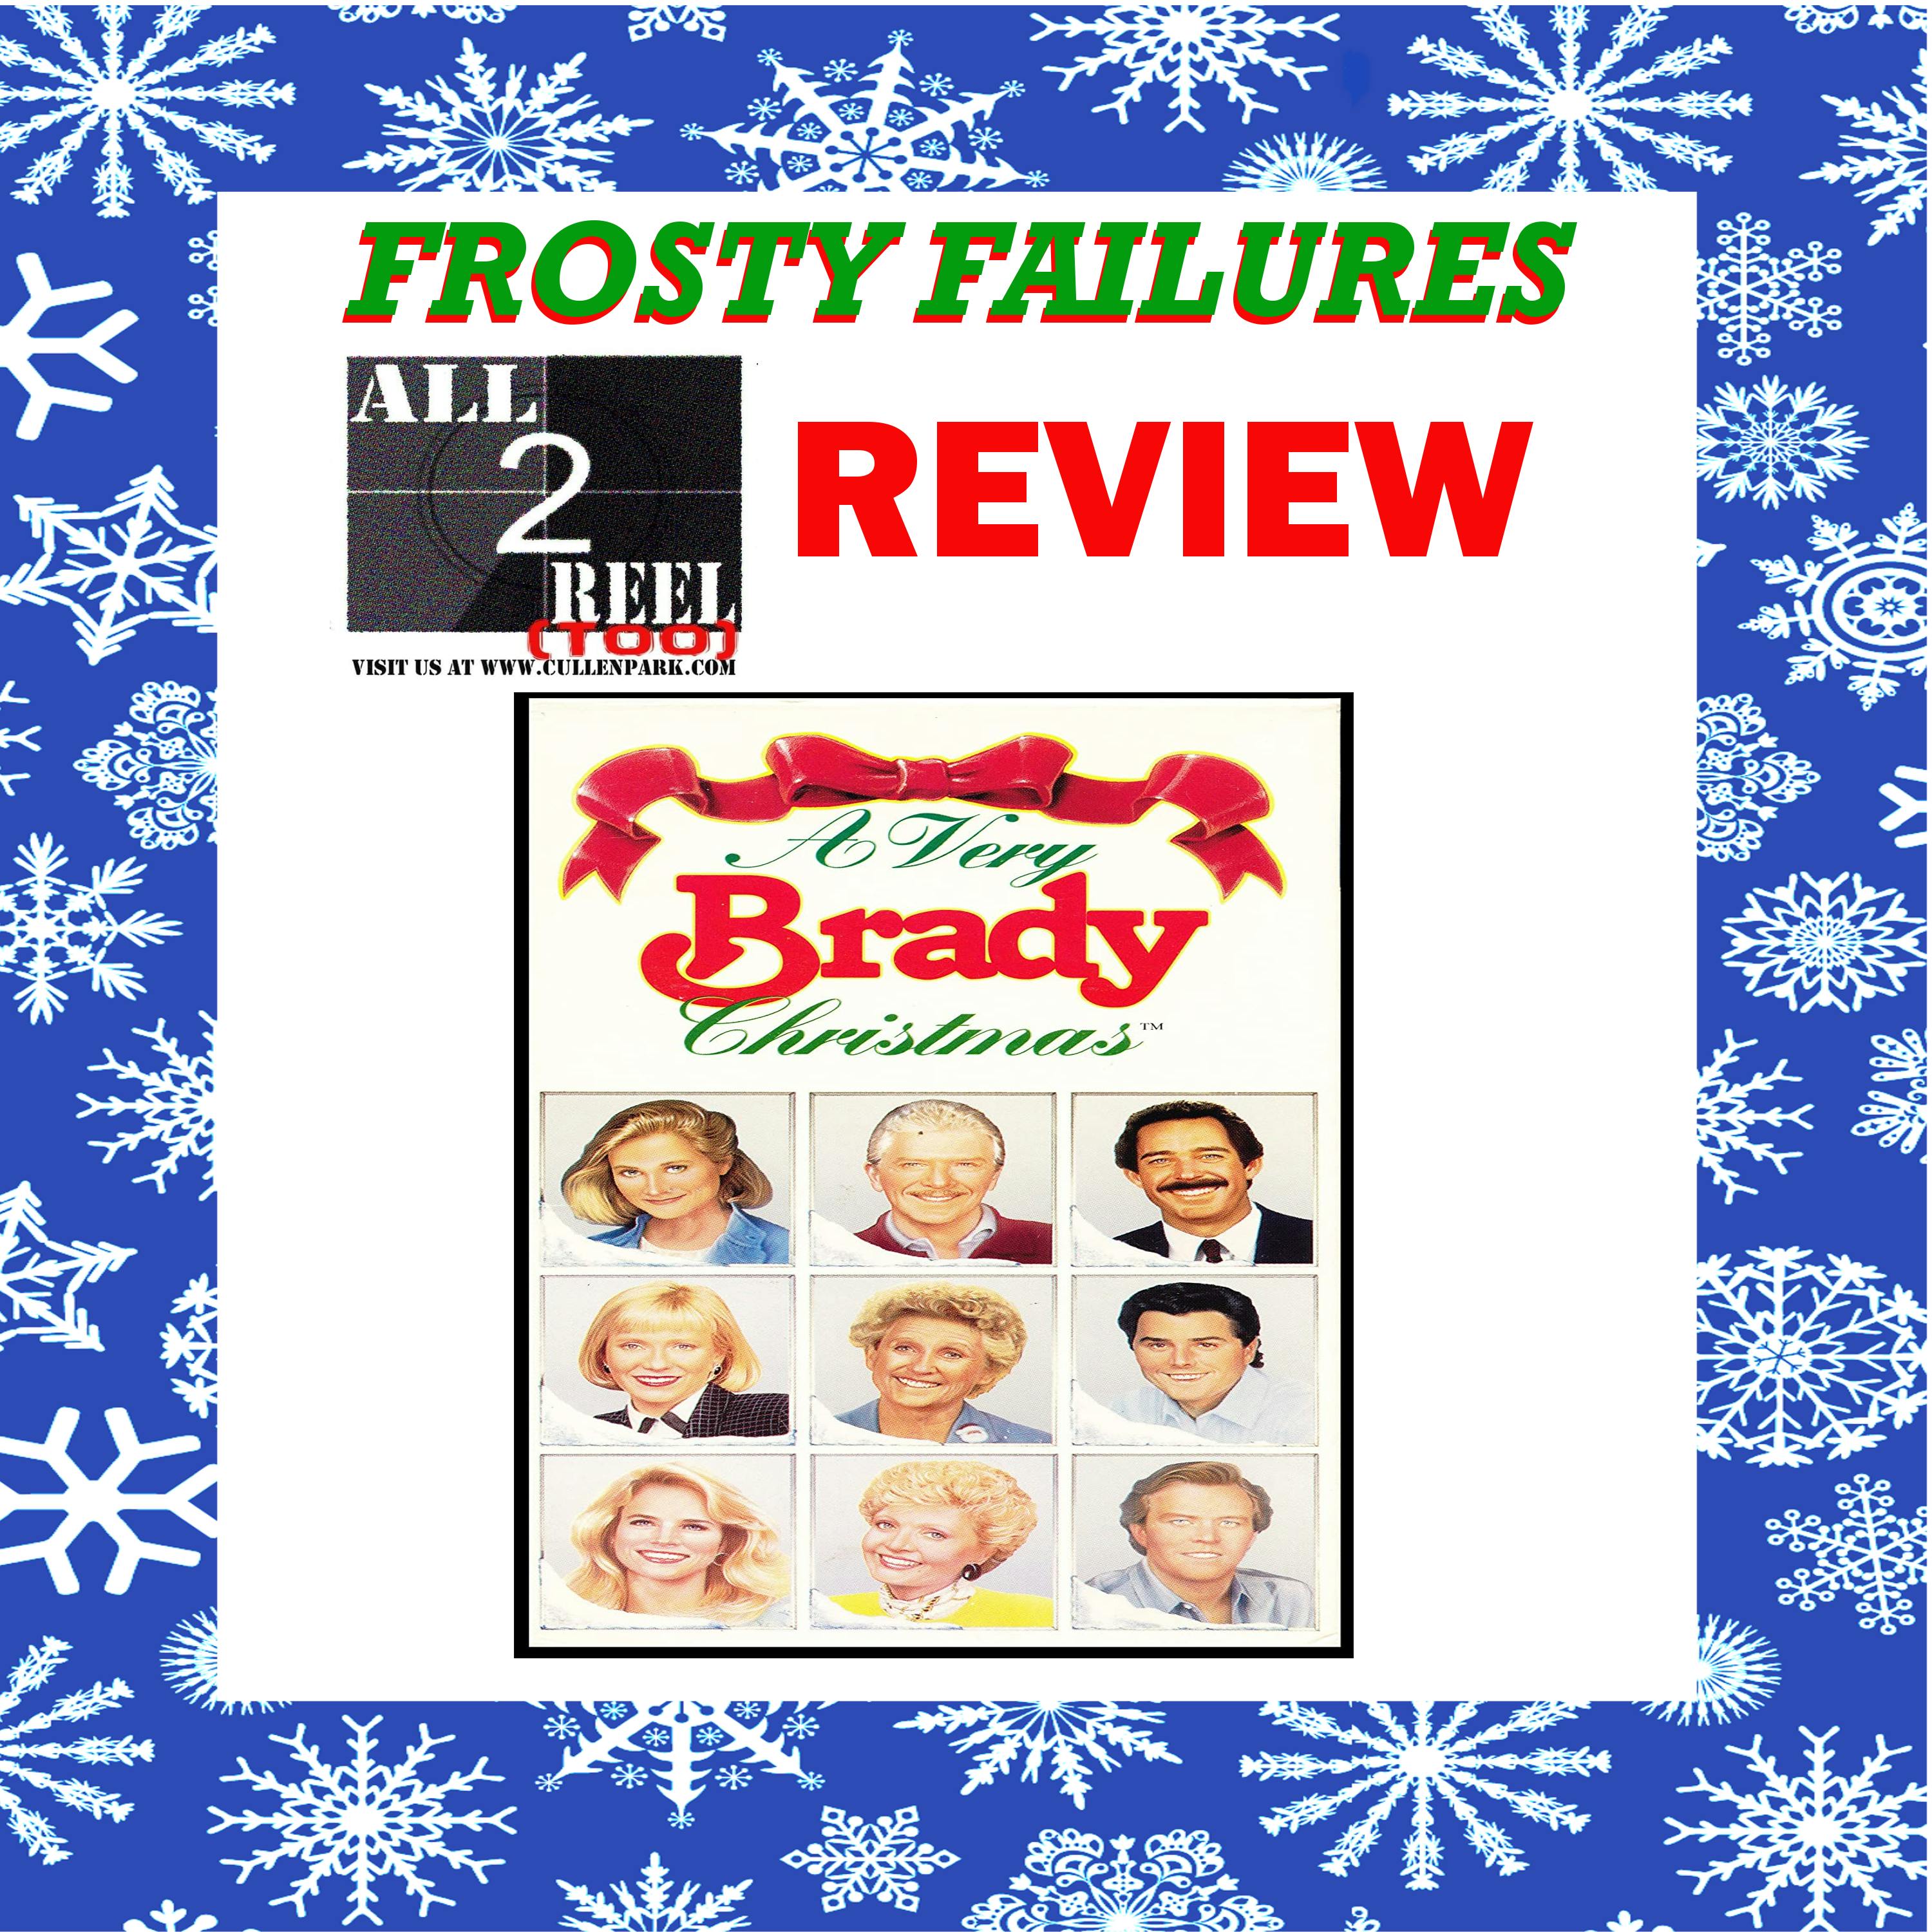 A Very Brady Christmas (1988) - FROSTY FAILURES REVIEW